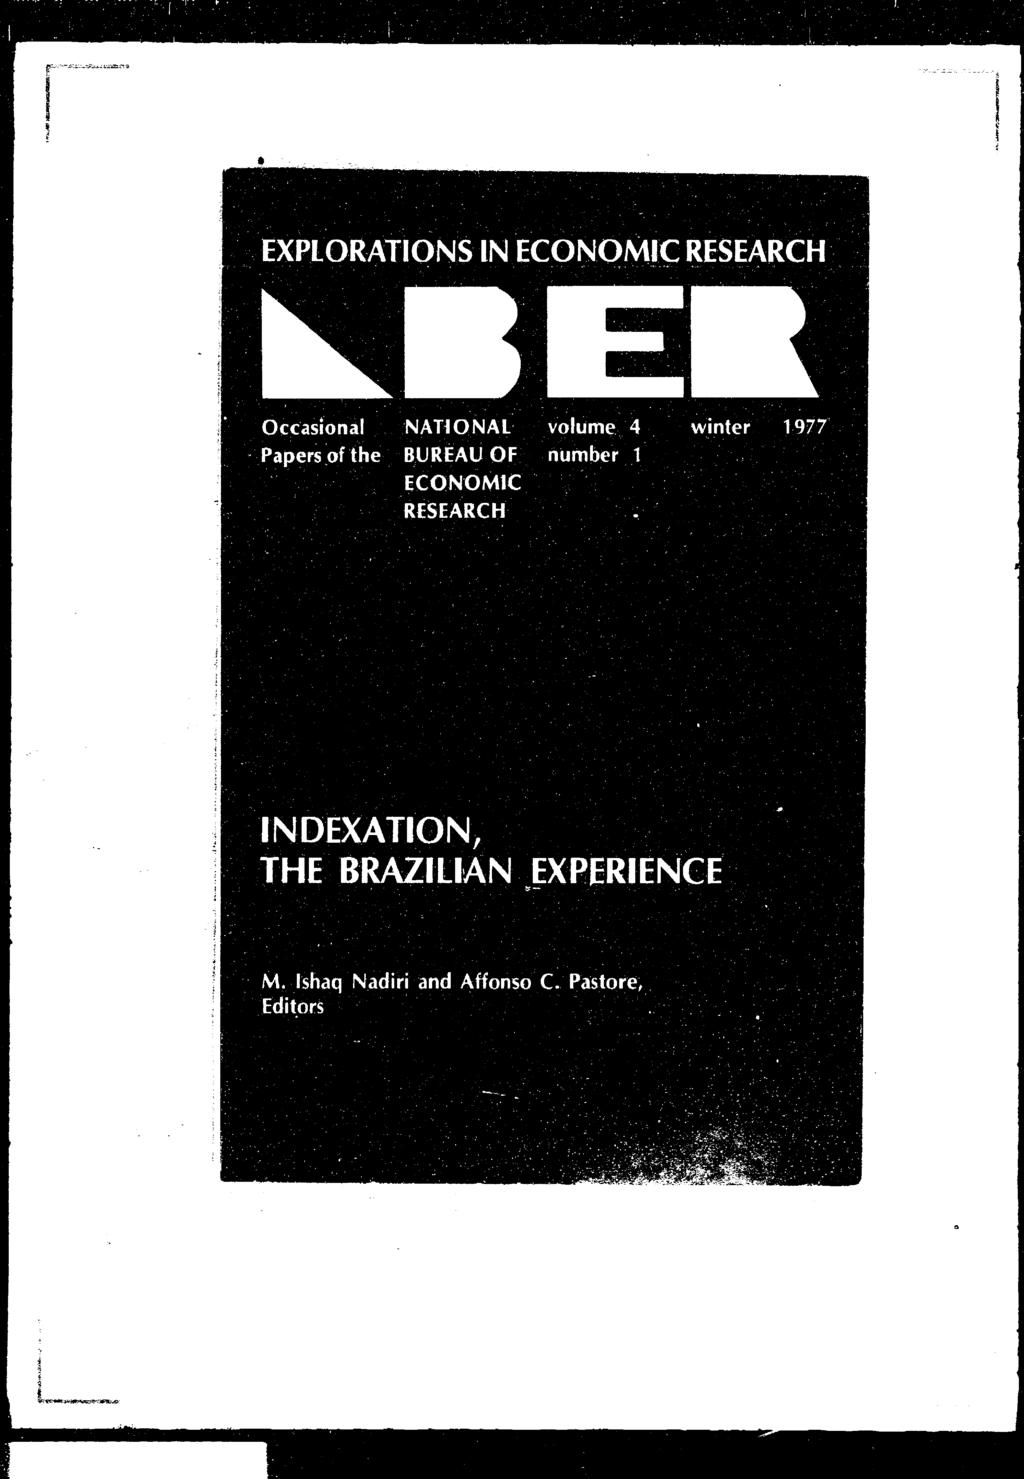 EXPLORATIONS IN ECONOMIC RESEARCI-I OccasonaI NATIONAL volume 4 Papers of the